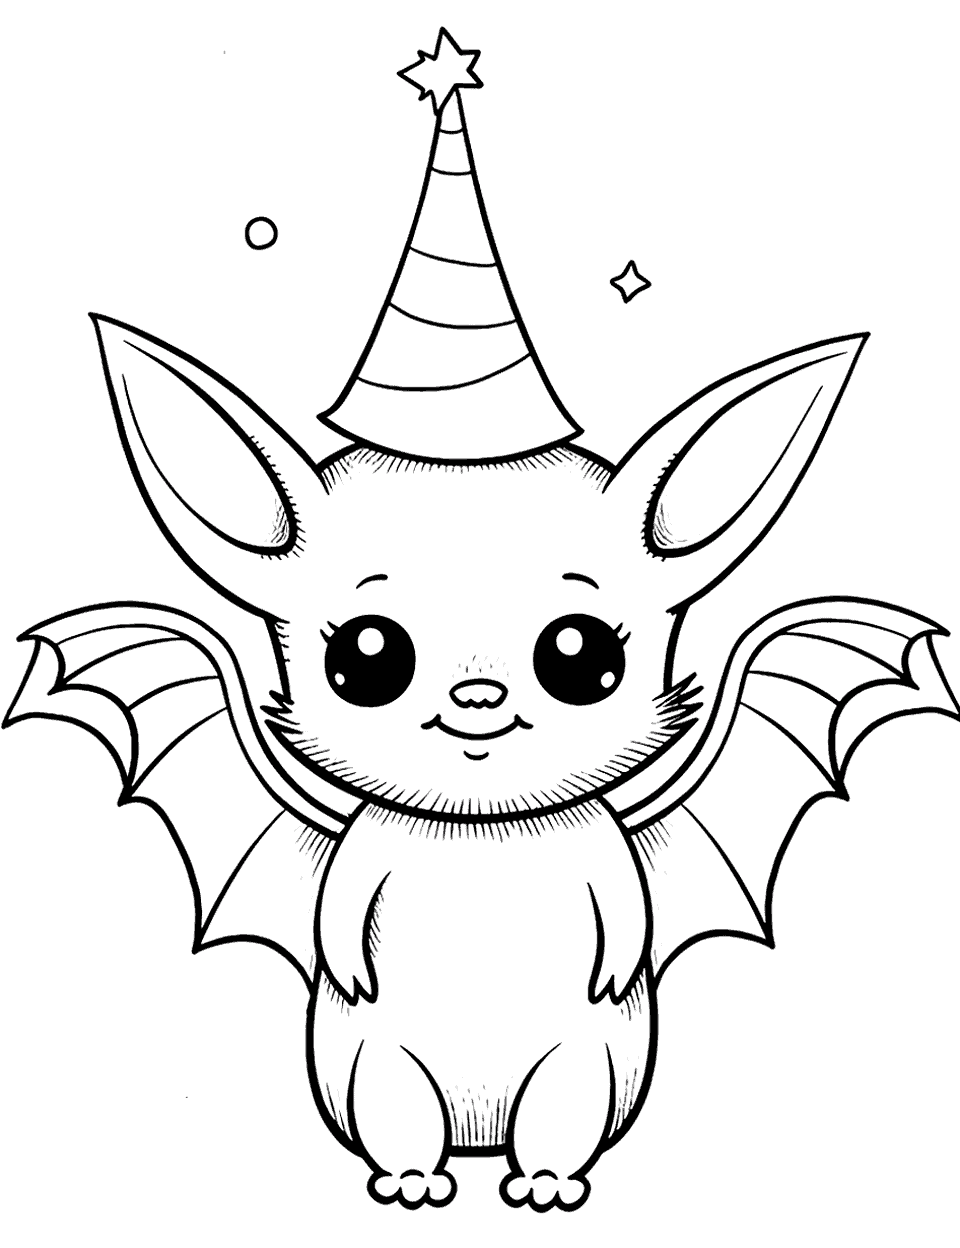 Bat with a Party Hat Coloring Page - A fun image of a bat wearing a party hat.